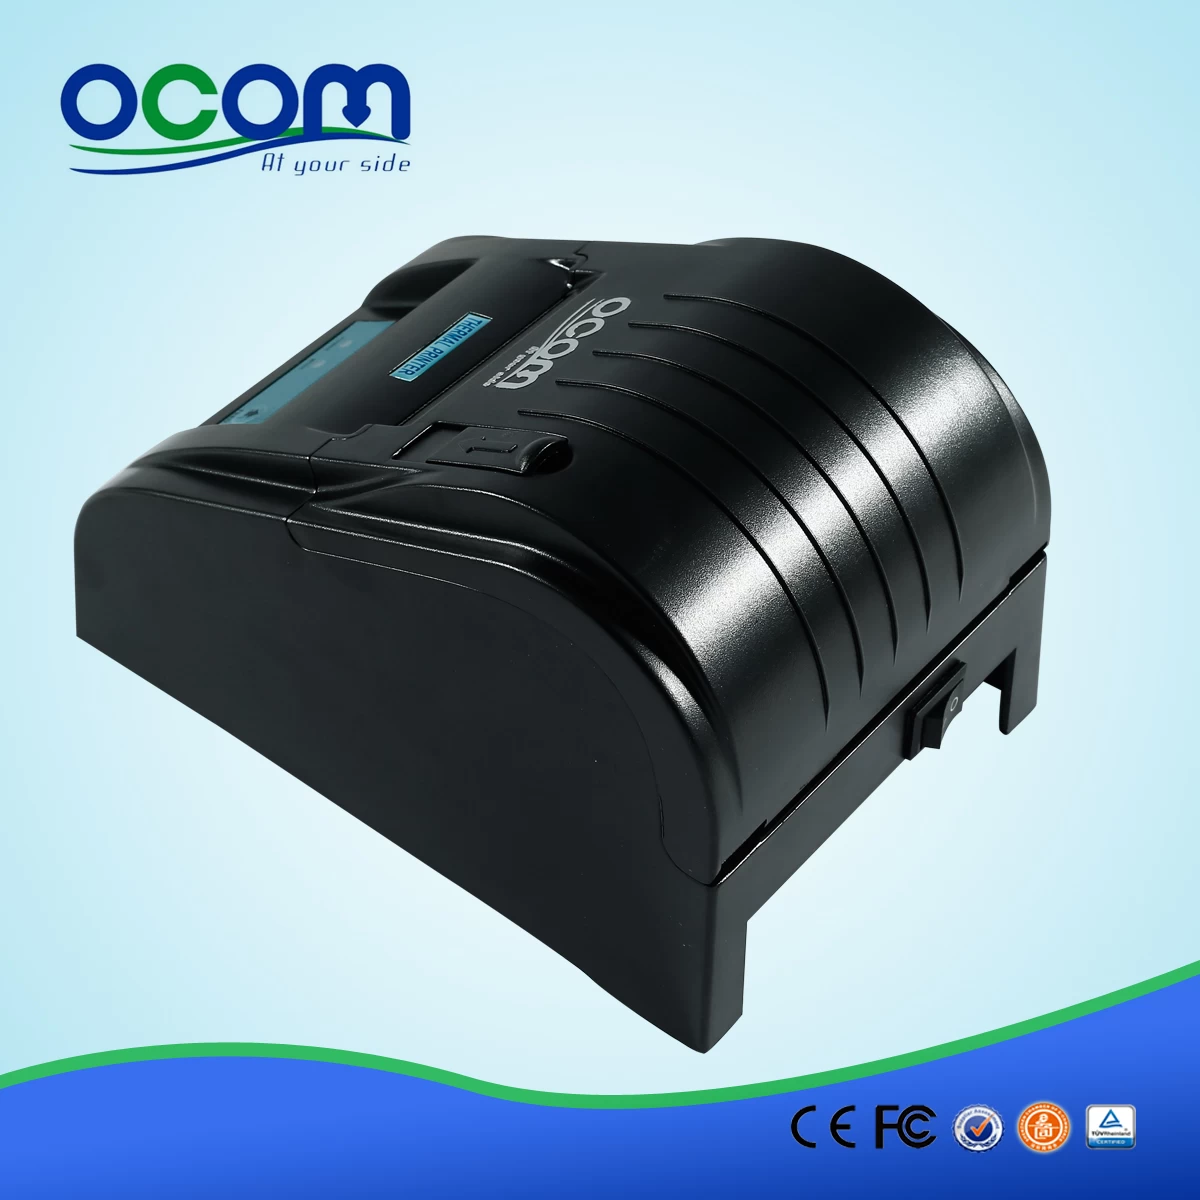 Lowest Priced 58mm Android Thermal Receipt Printer--OCPP-585